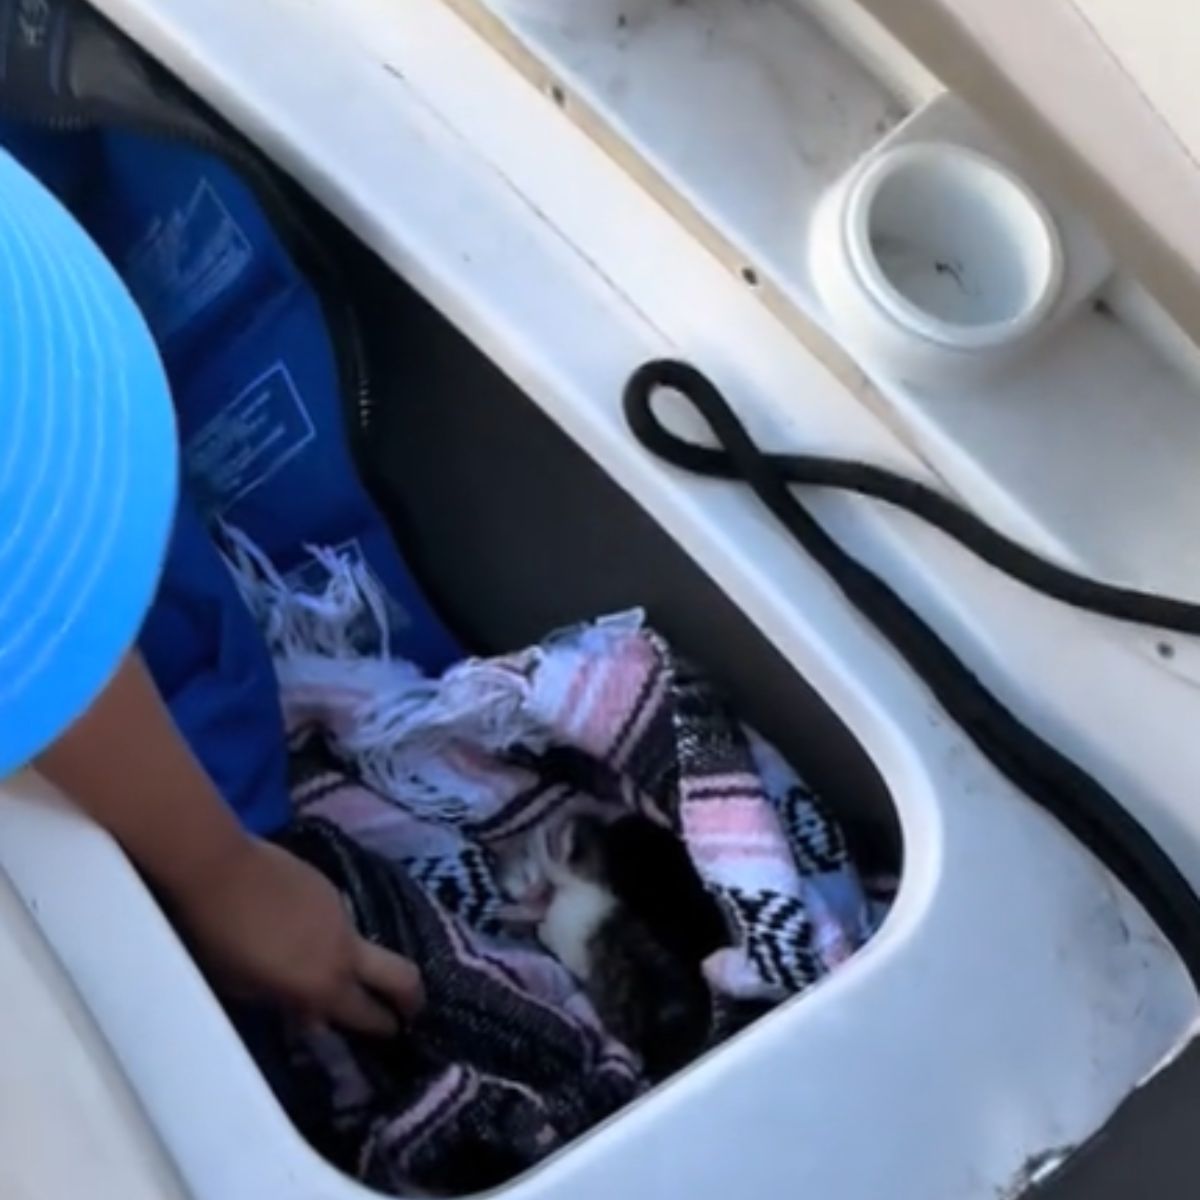 kittens on a sailboat